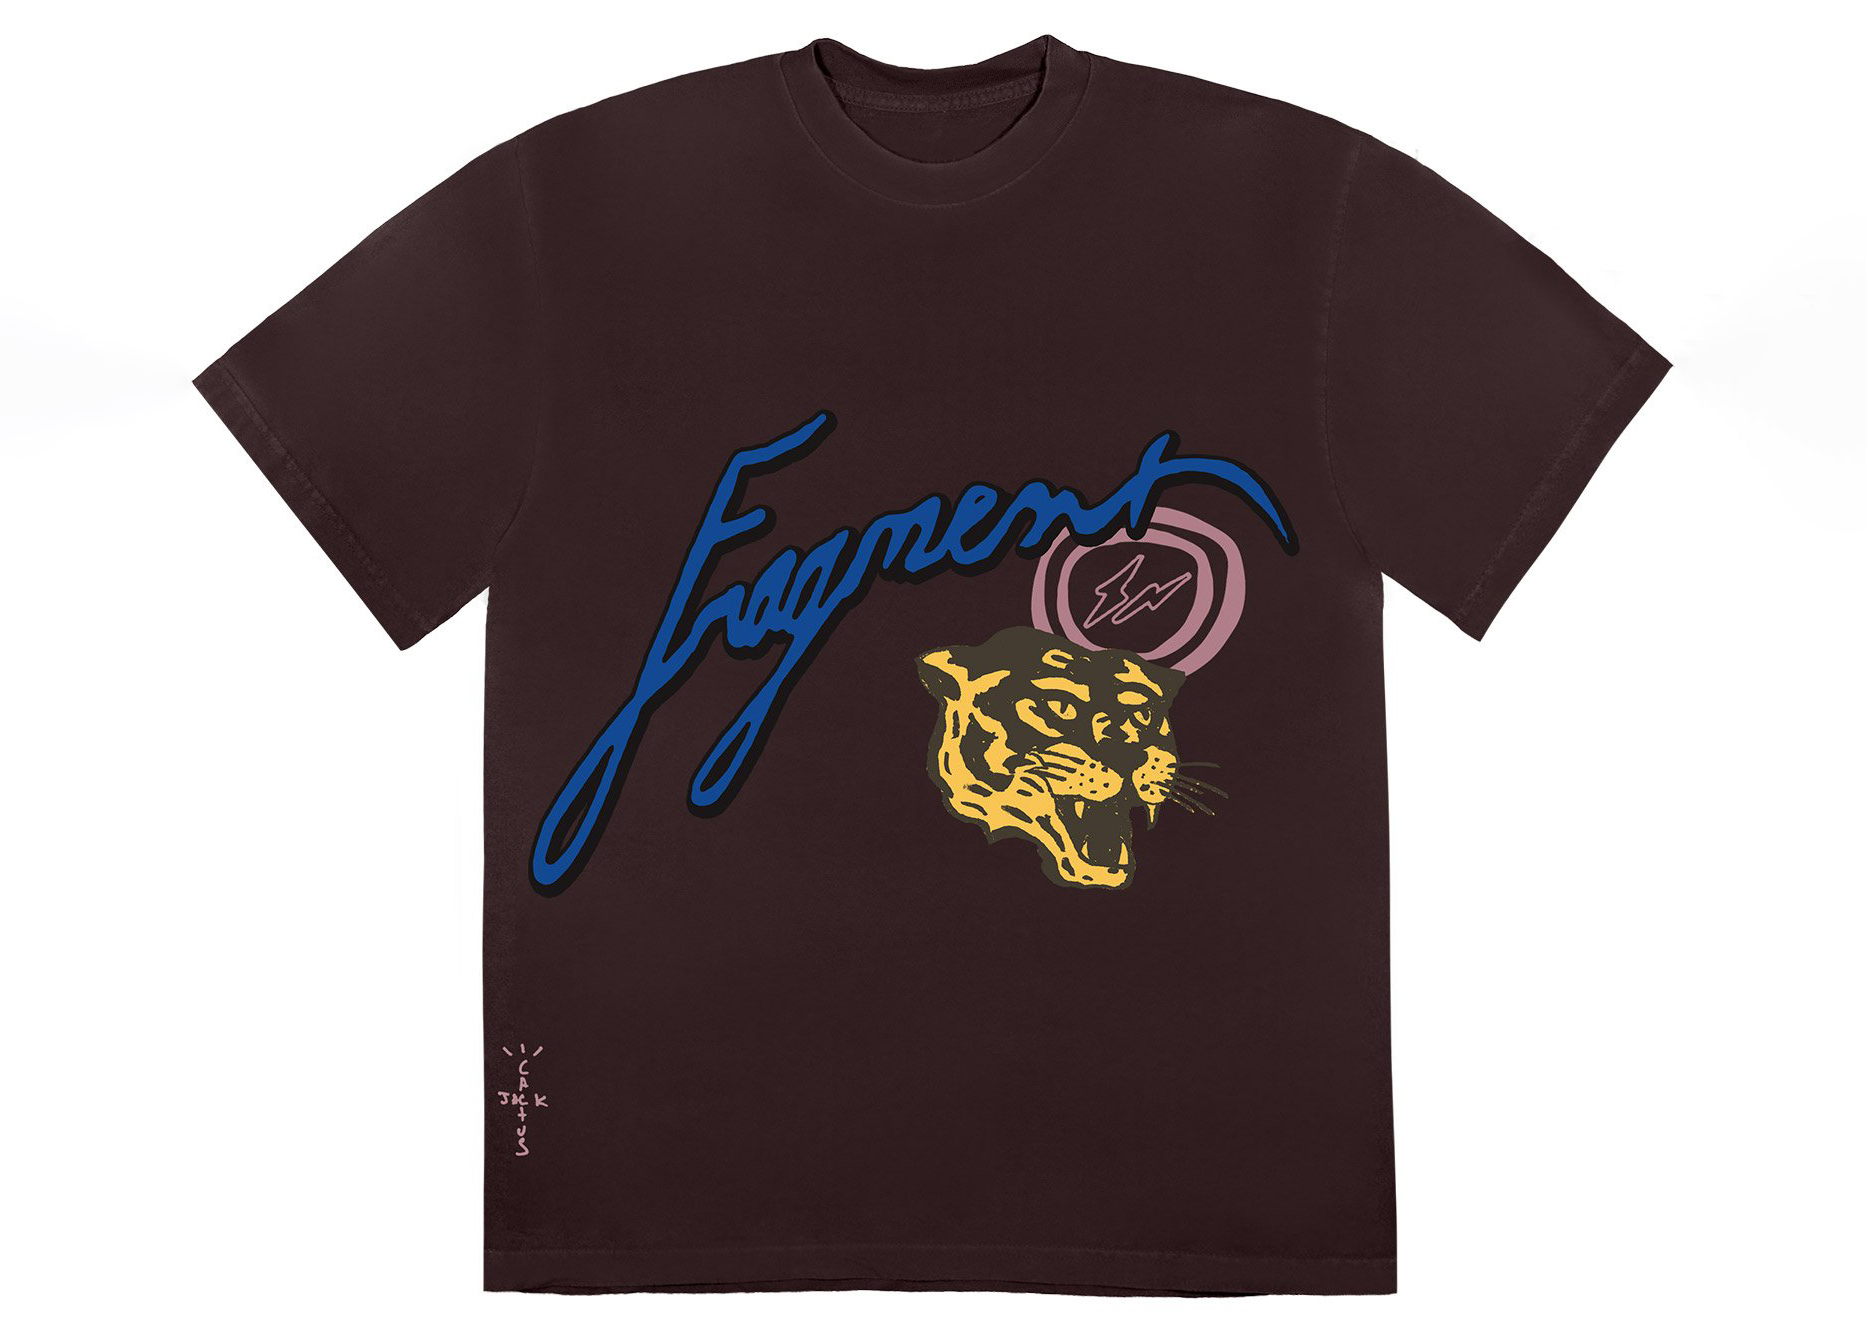 Cactus Jack For Fragment Icons Tee Brown - Tシャツ/カットソー(半袖